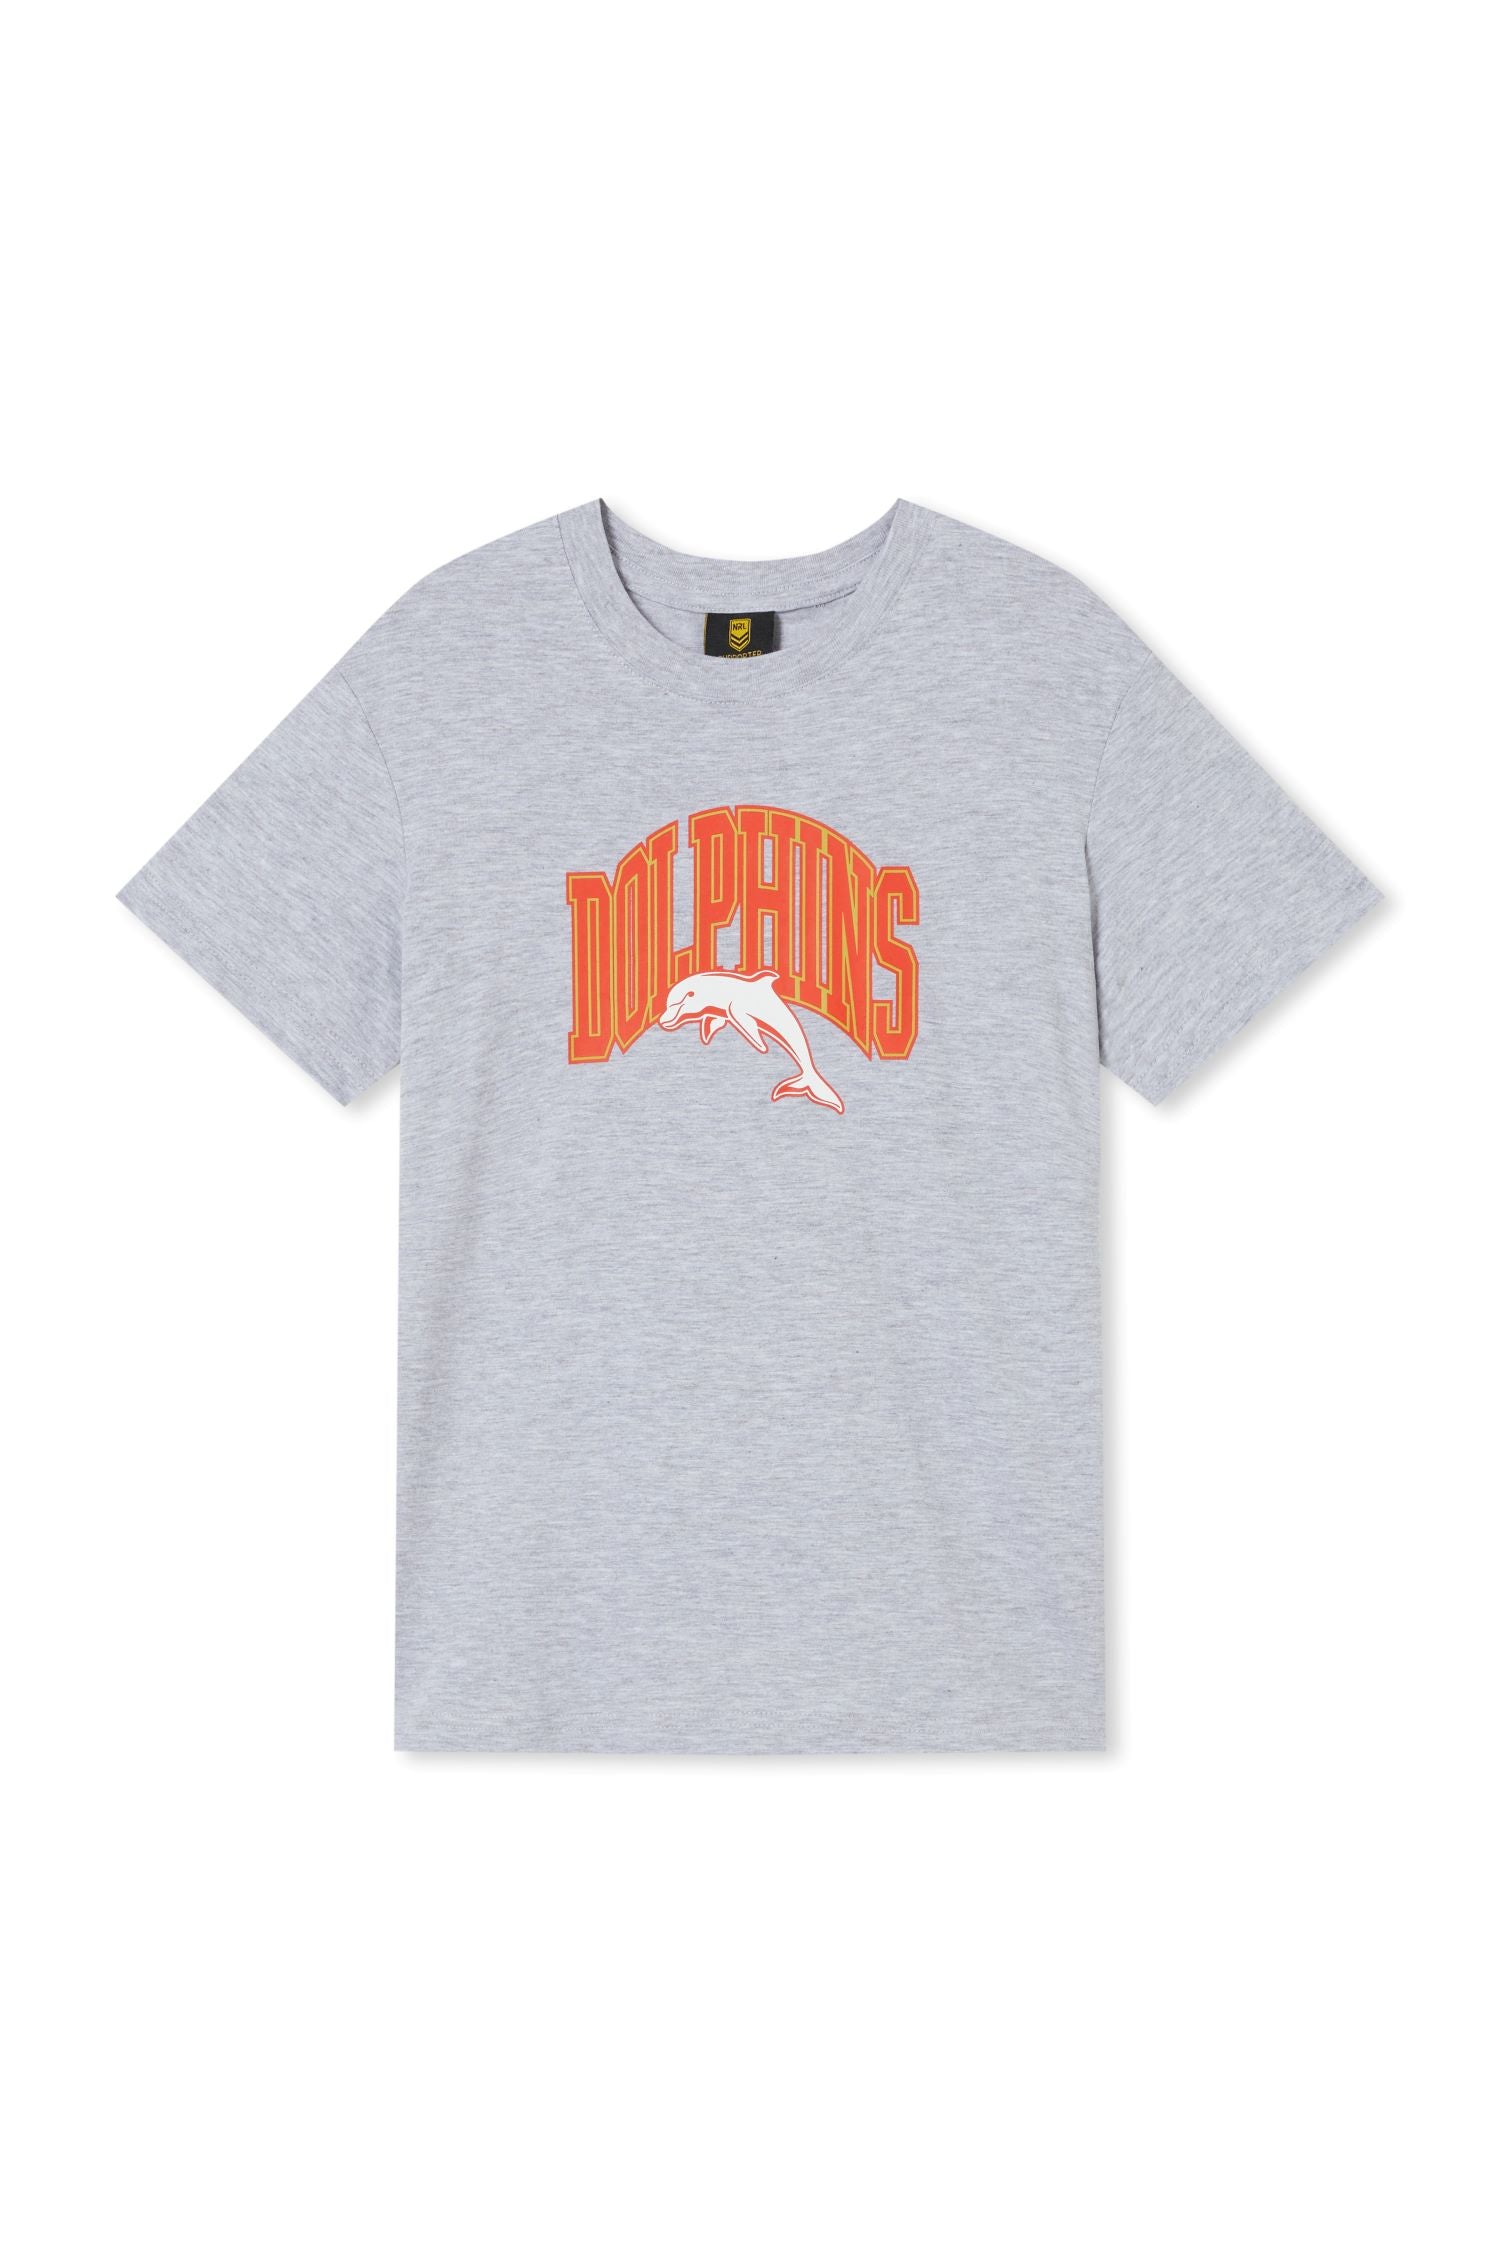 DOLPHINS YOUTH COLLEGE TEAM T-SHIRT